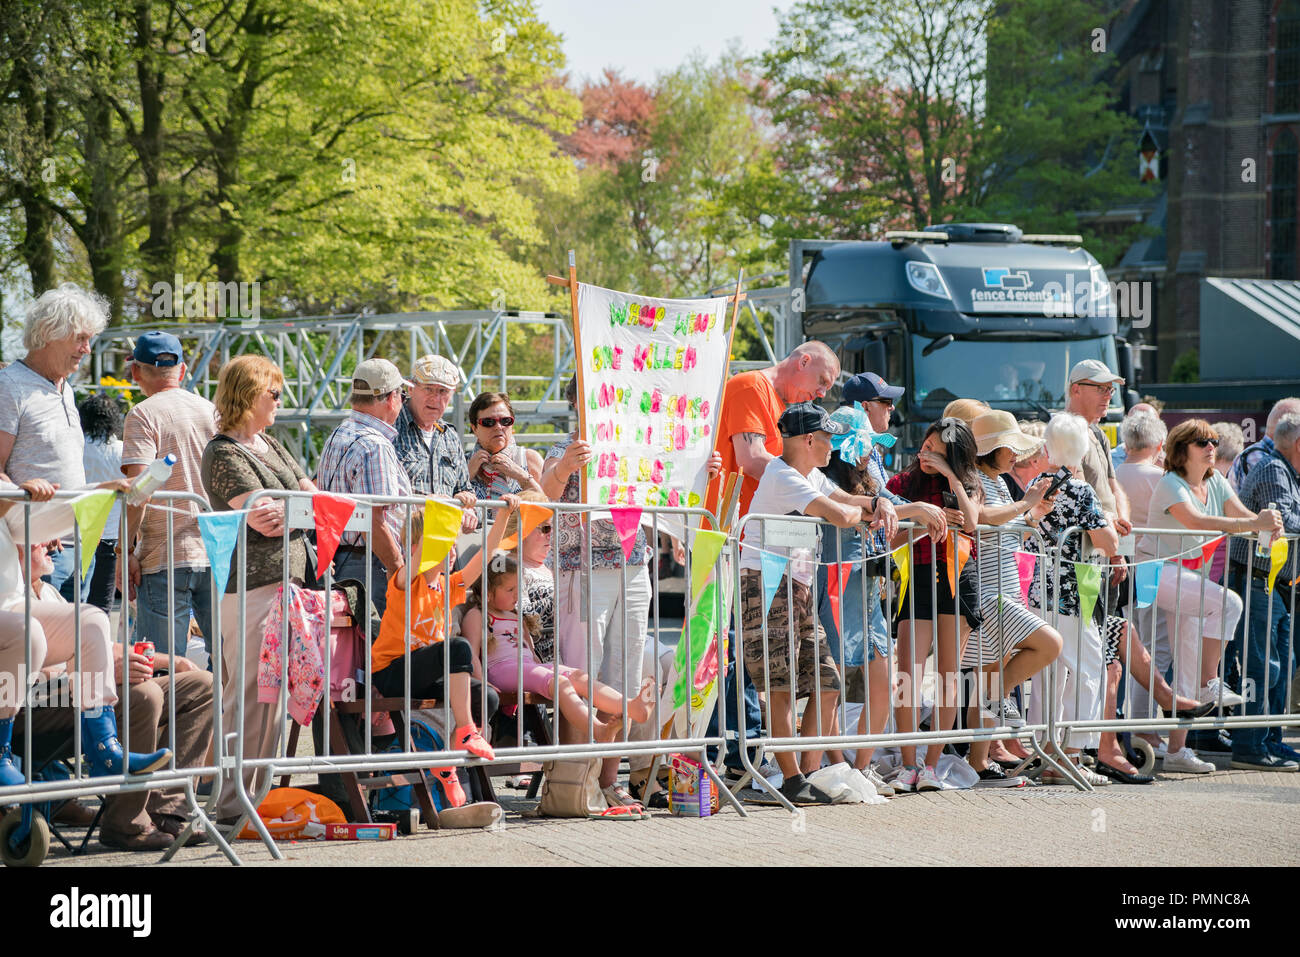 Lisse, APR 21: People waiting for the famous flower parade on APR 21, 2018 at Lisse, Netherlands Stock Photo